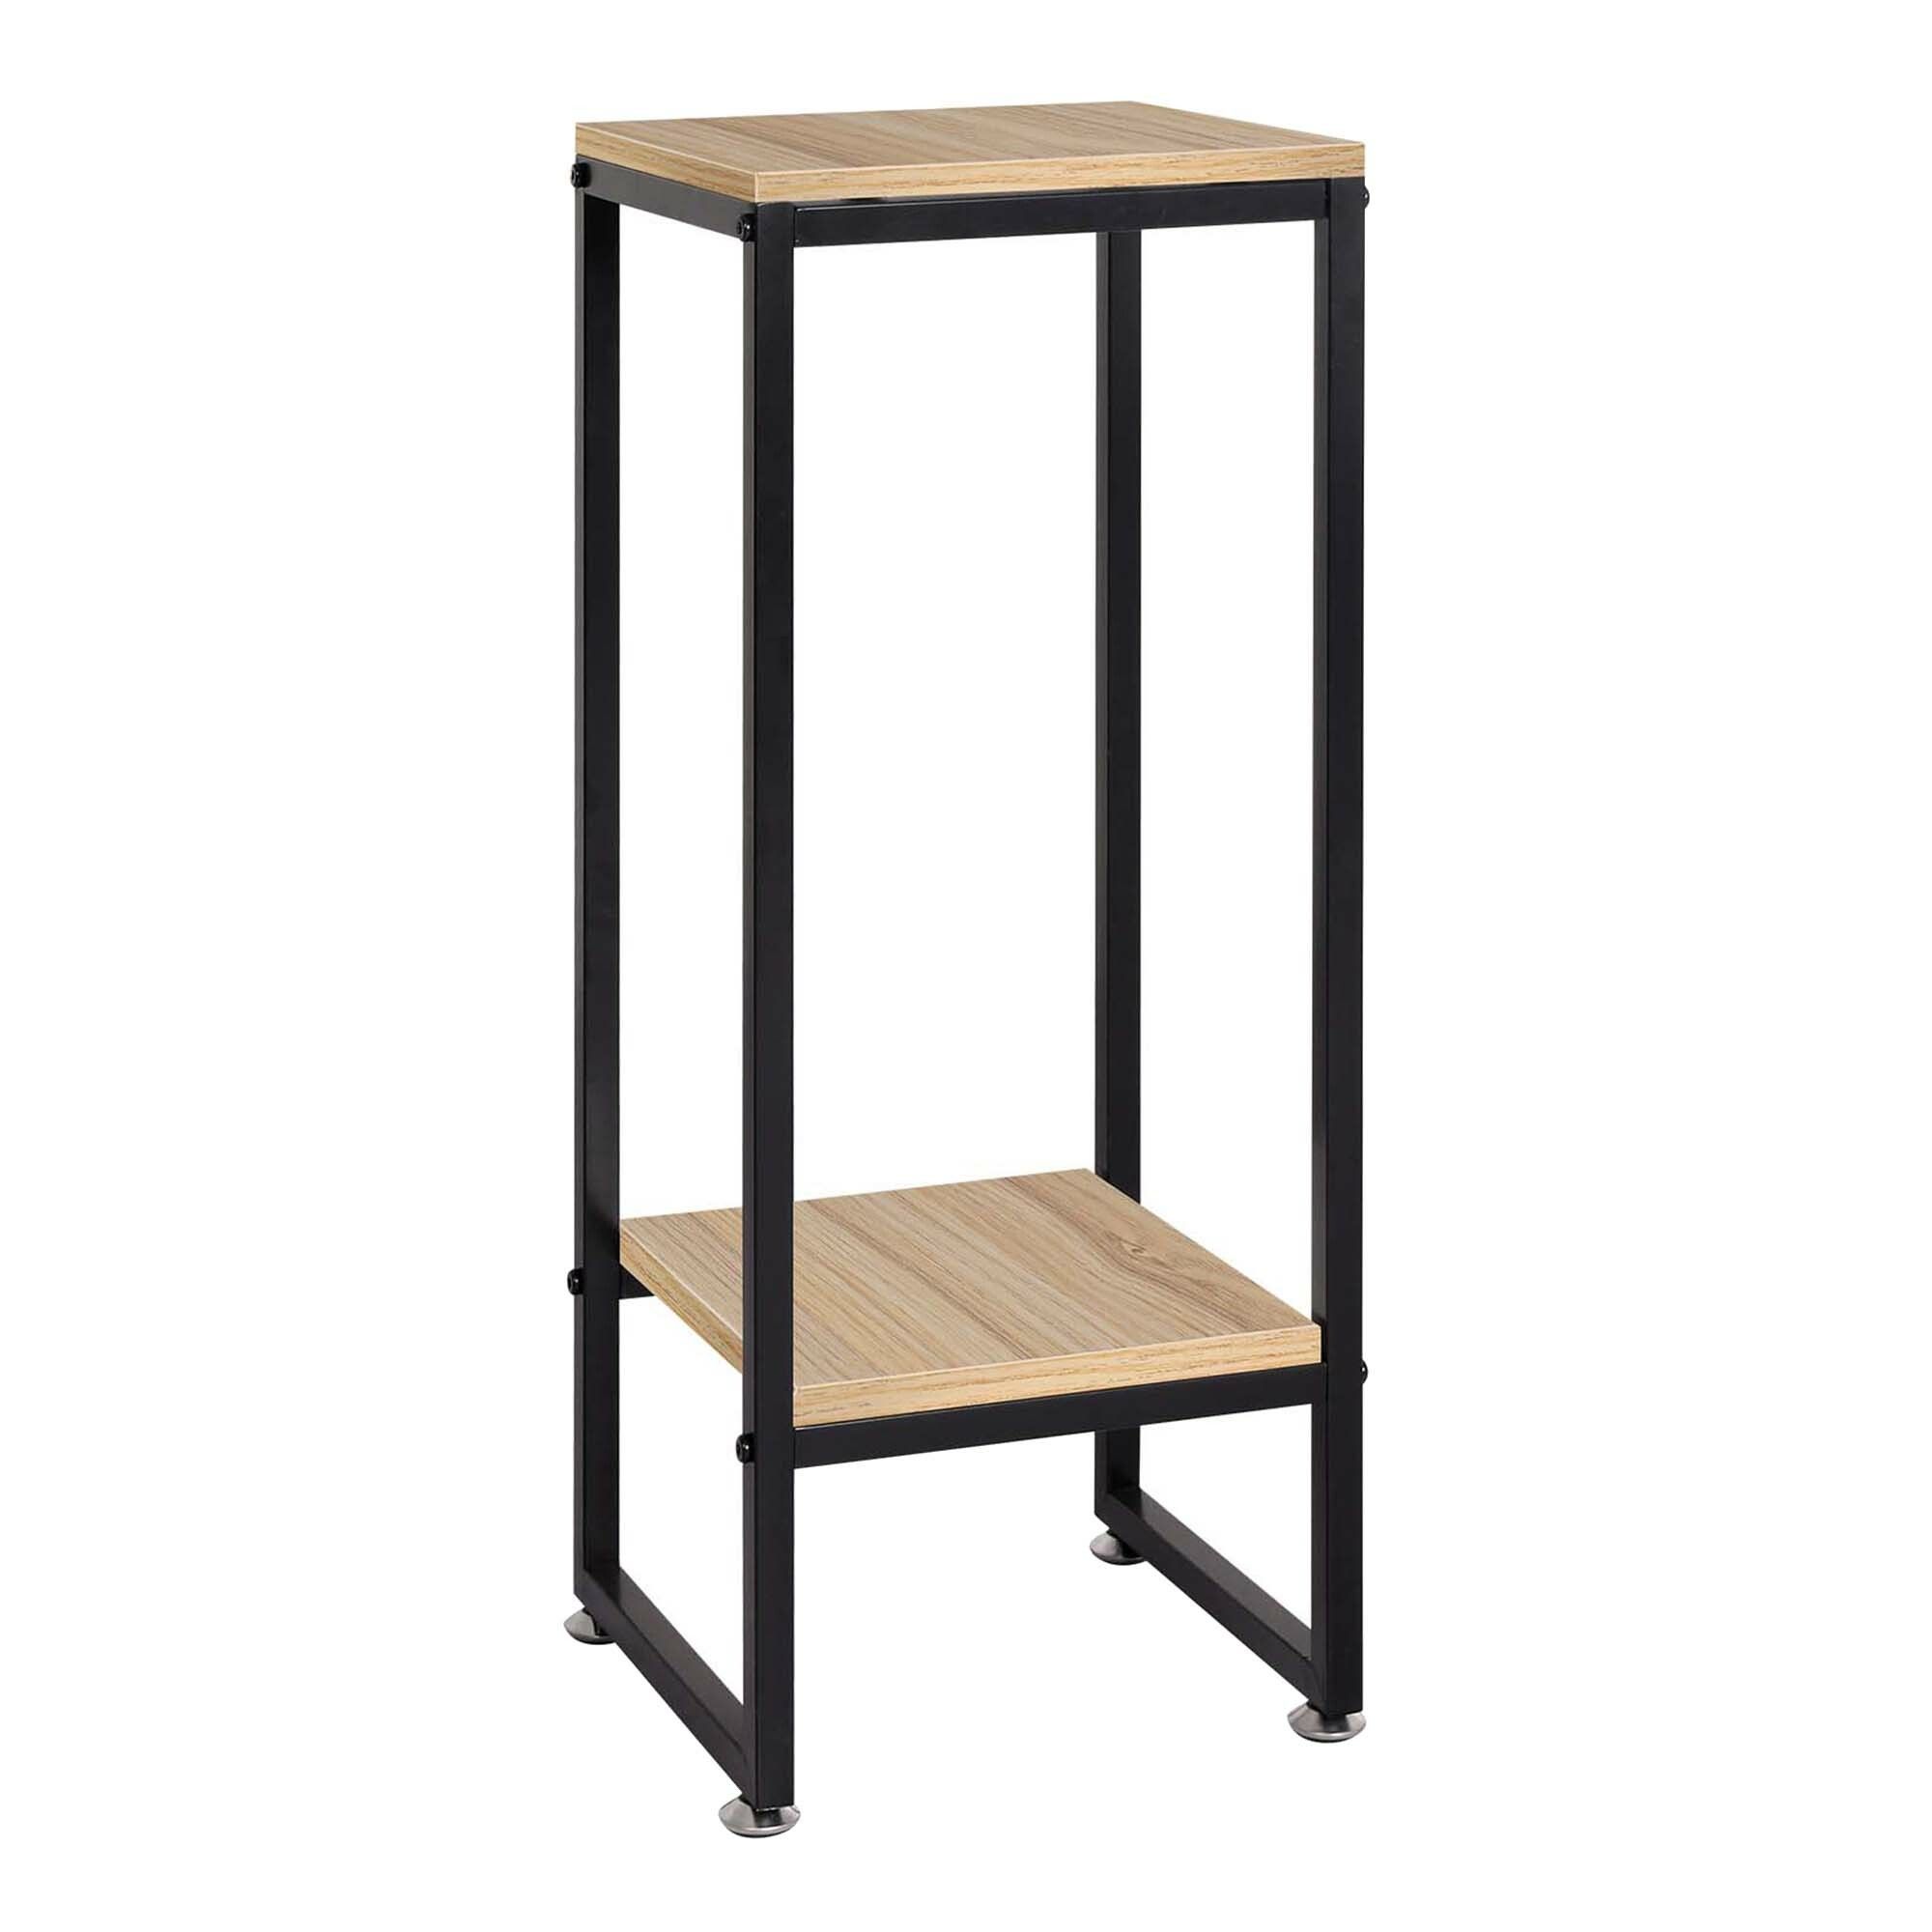 Oakleigh Home Lucille 2 Tier Plant Stand | Temple & Webster Within Two Tier Plant Stands (View 7 of 15)